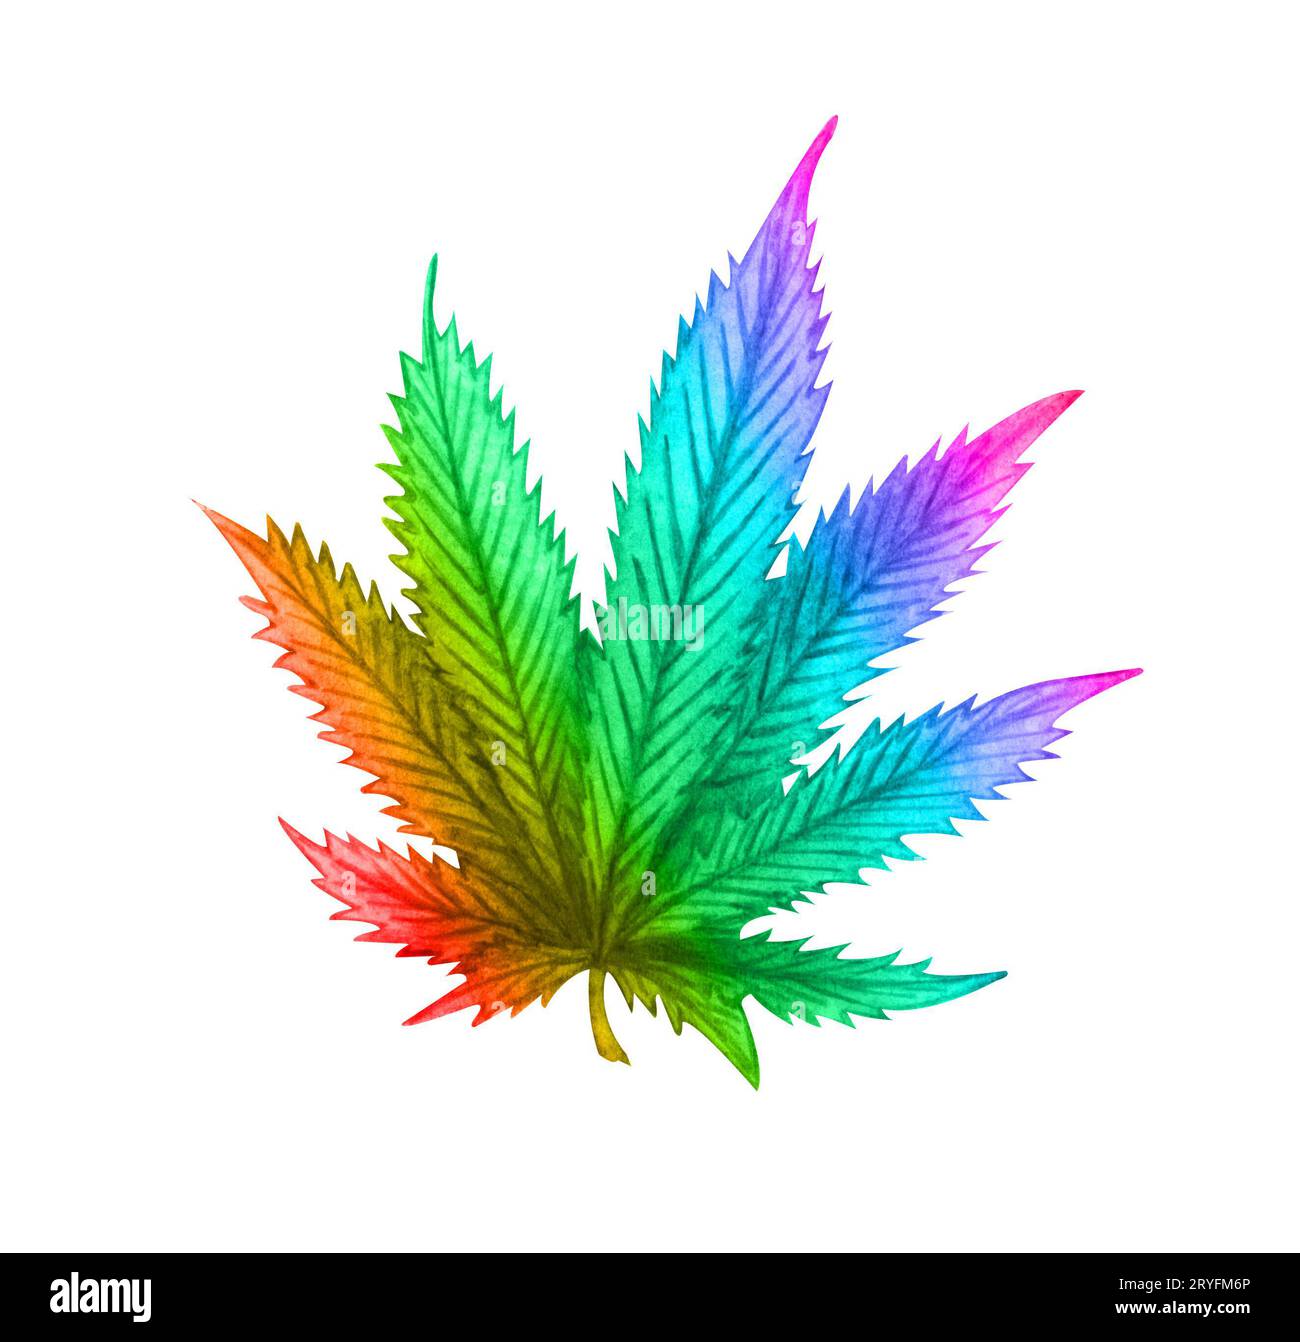 Rainbow cannabis leaf on white background. Hand drawn watercolor illustration Stock Photo